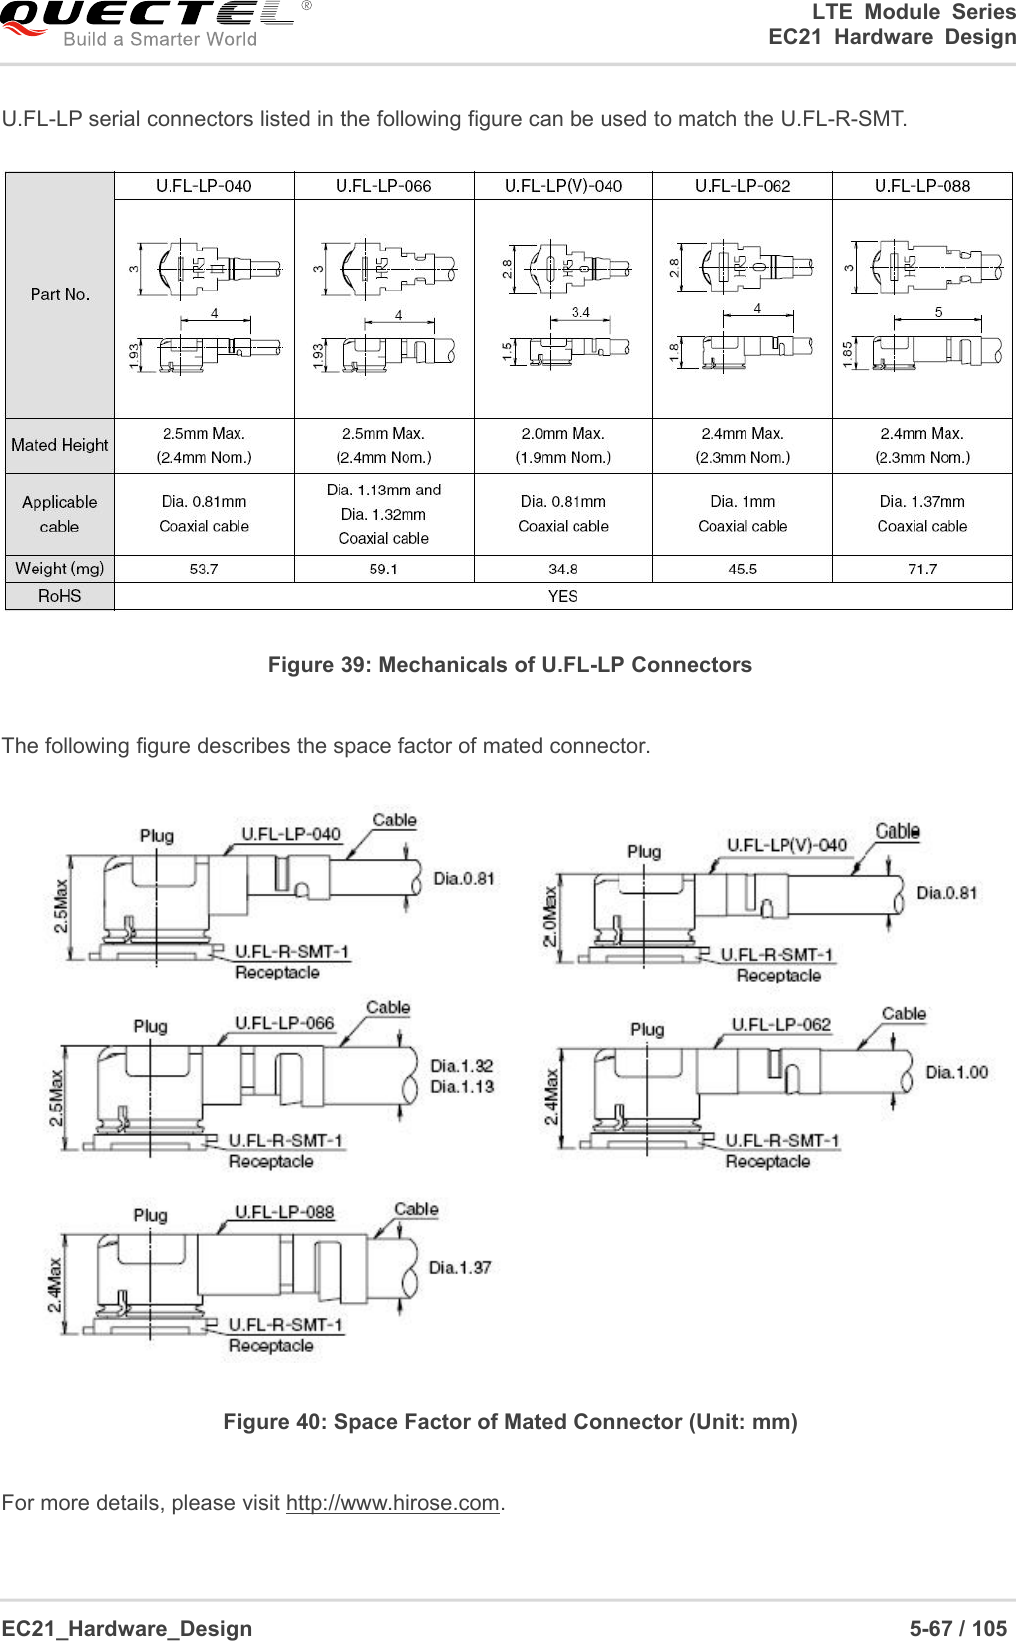 LTE Module SeriesEC21 Hardware DesignEC21_Hardware_Design 5-67 / 105U.FL-LP serial connectors listed in the following figure can be used to match the U.FL-R-SMT.Figure 39: Mechanicals of U.FL-LP ConnectorsThe following figure describes the space factor of mated connector.Figure 40: Space Factor of Mated Connector (Unit: mm)For more details, please visit http://www.hirose.com.